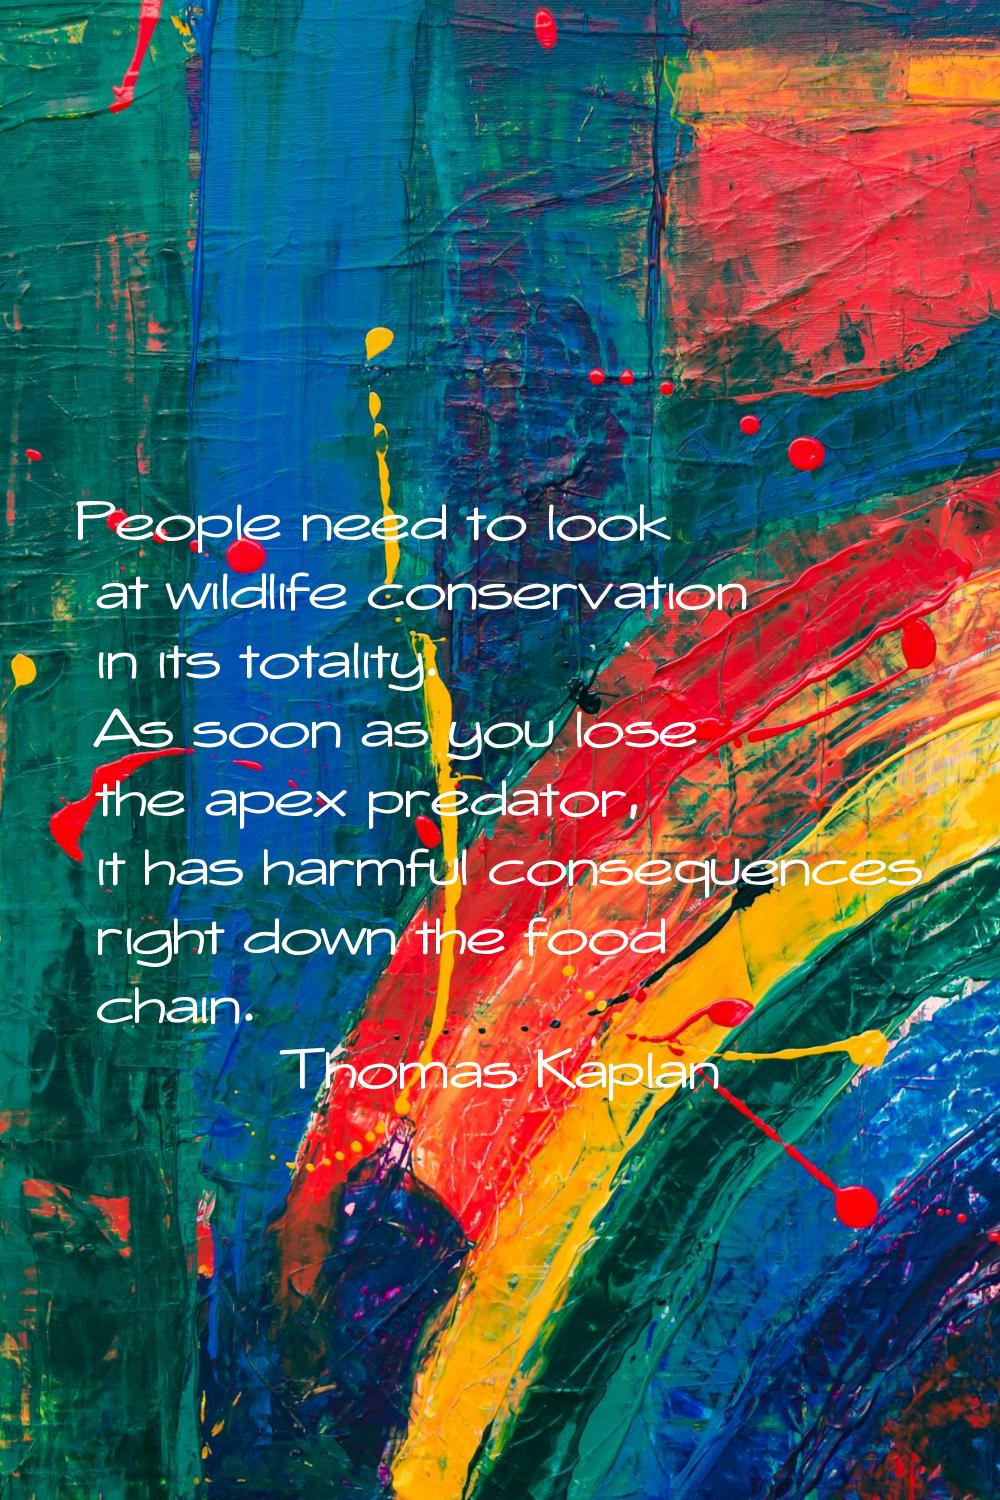 People need to look at wildlife conservation in its totality. As soon as you lose the apex predator